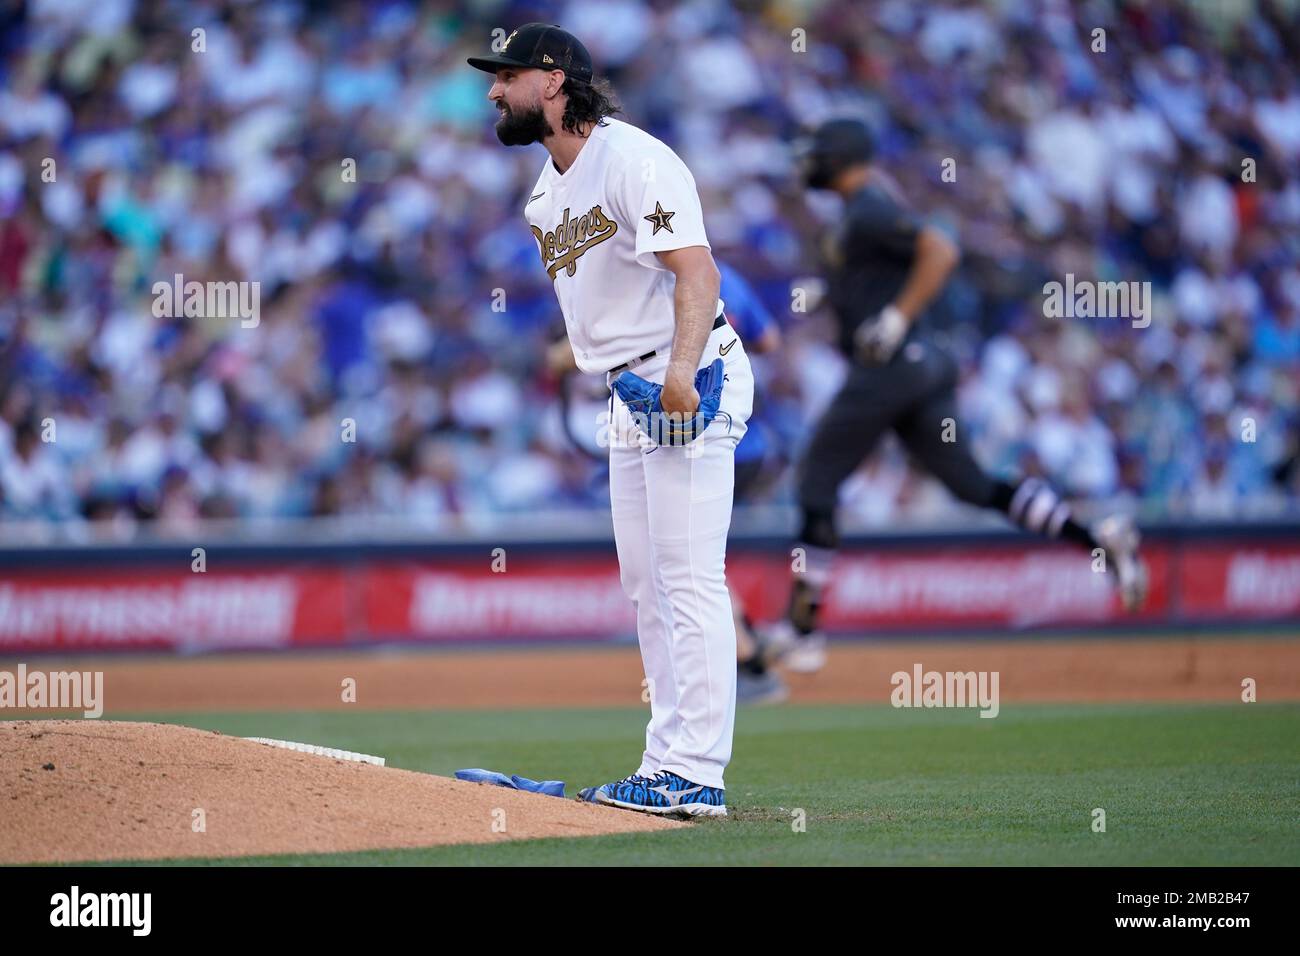 National League relief pitcher Tony Gonsolin, of the Los Angeles Dodgers,  walks off the mound after giving up a two run home run to American League  Giancarlo Stanton, of the New York